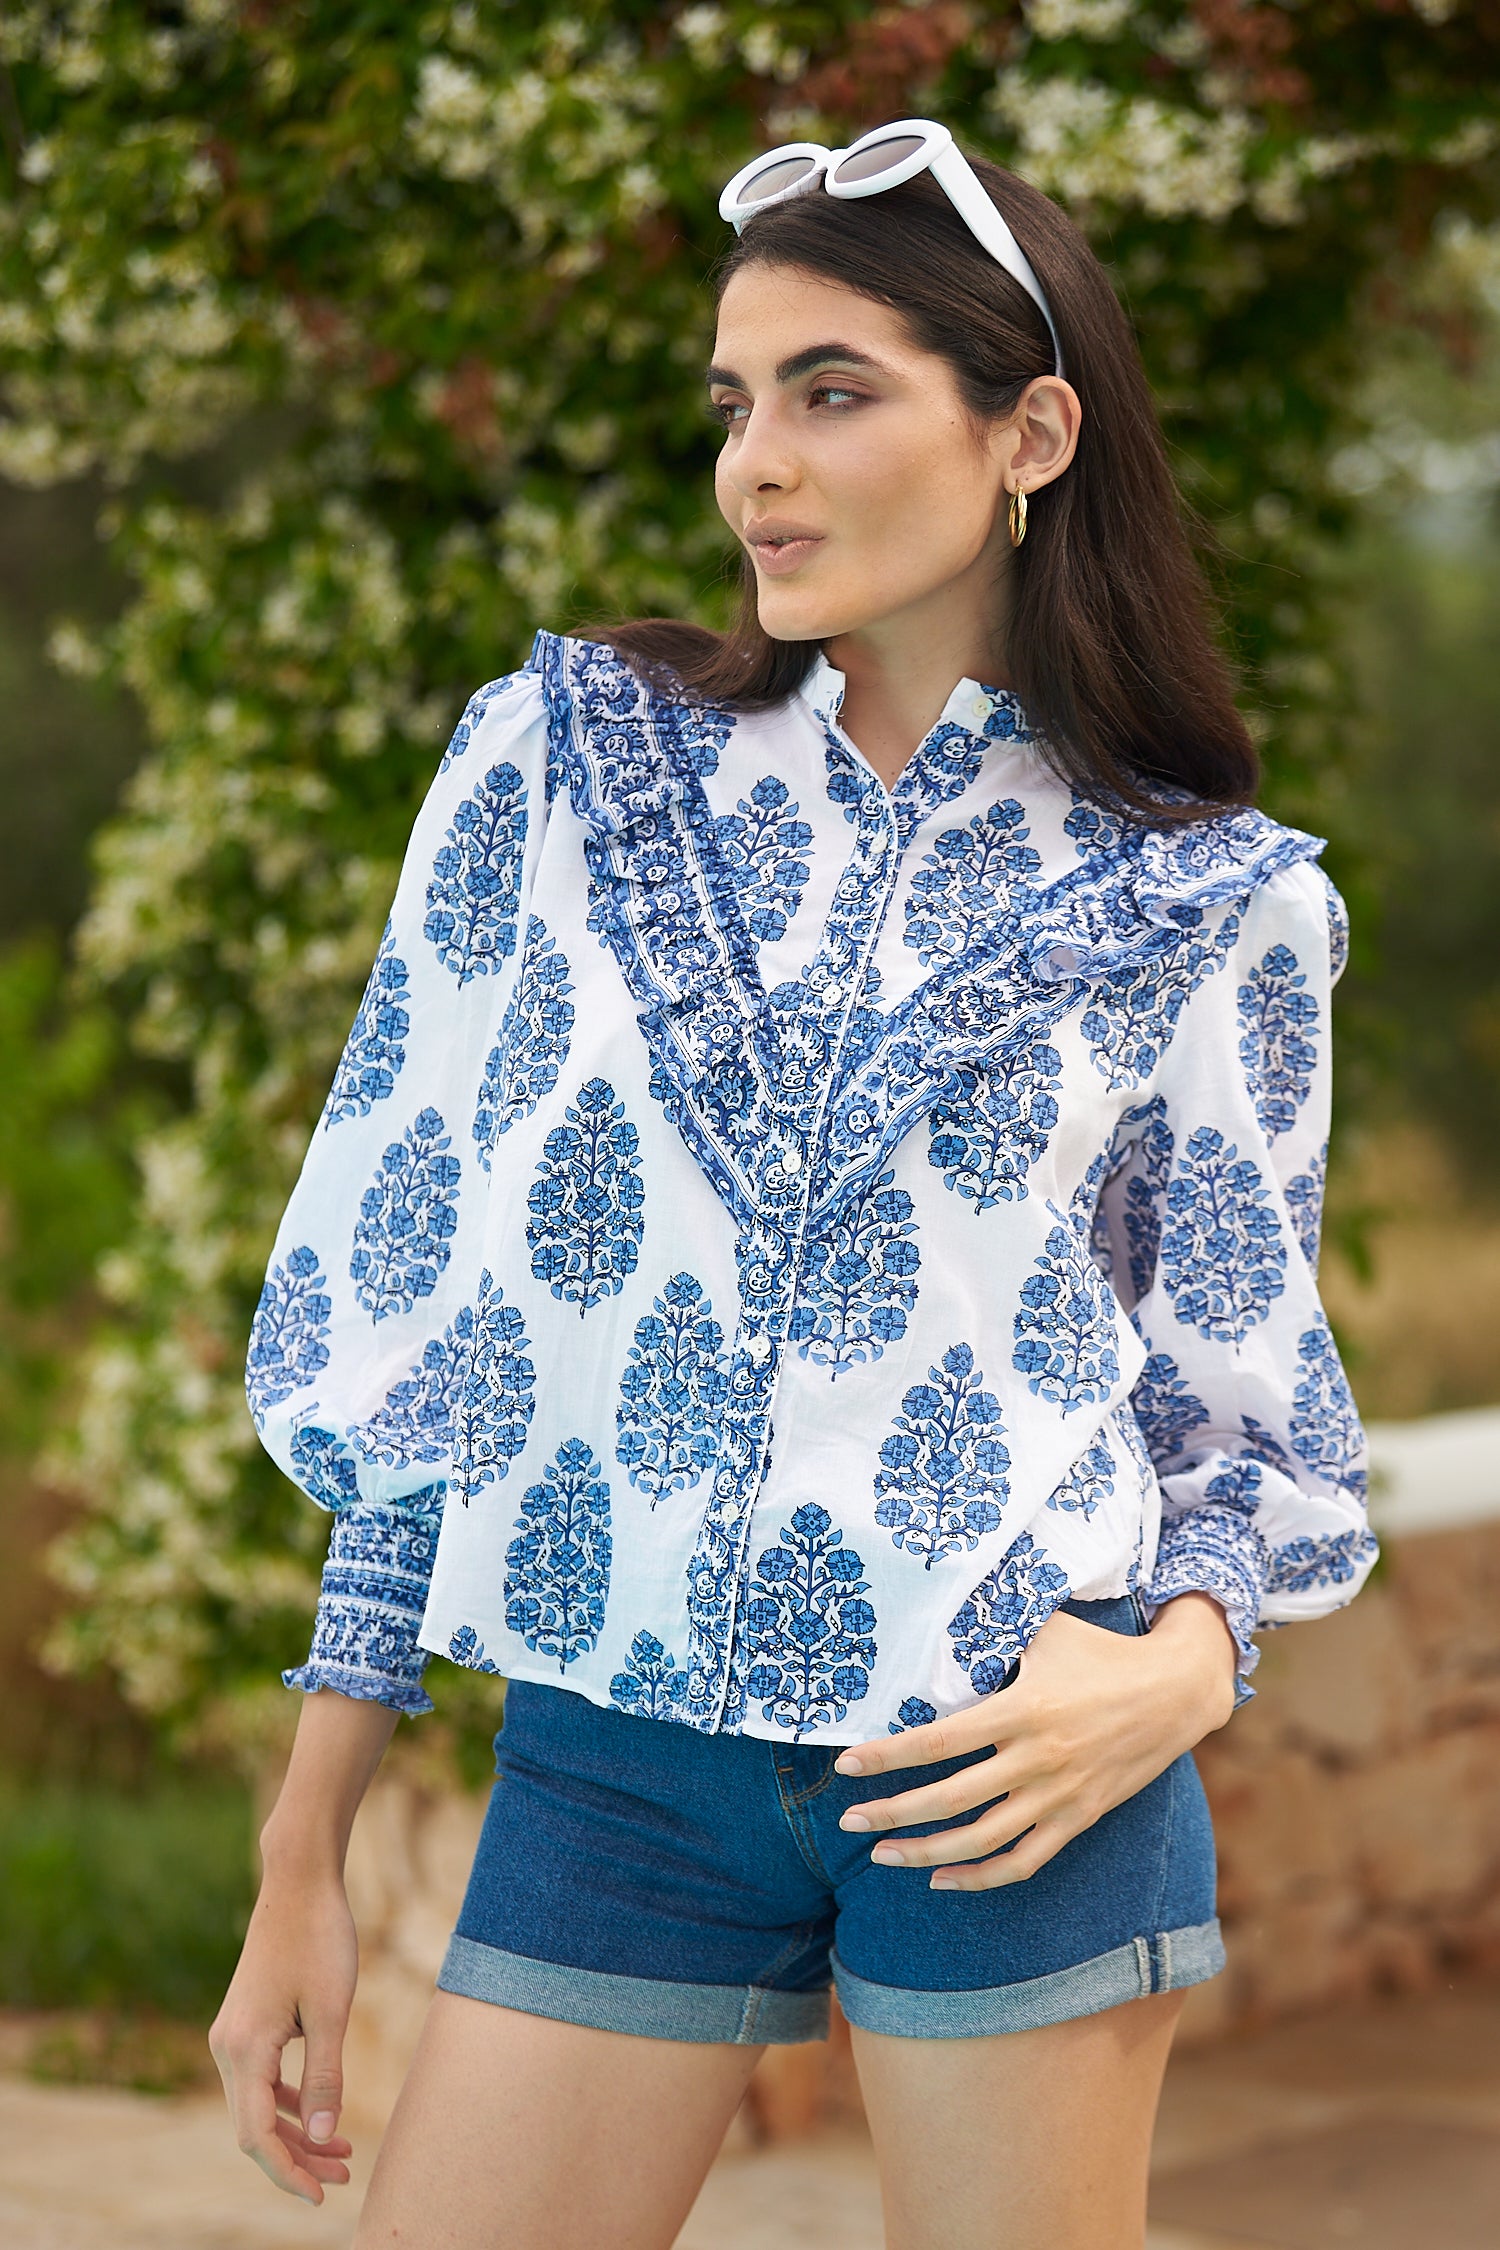 White shirt with mau collar and V shaped ruffle on the yoke with white background and blue floral print and long sleeves